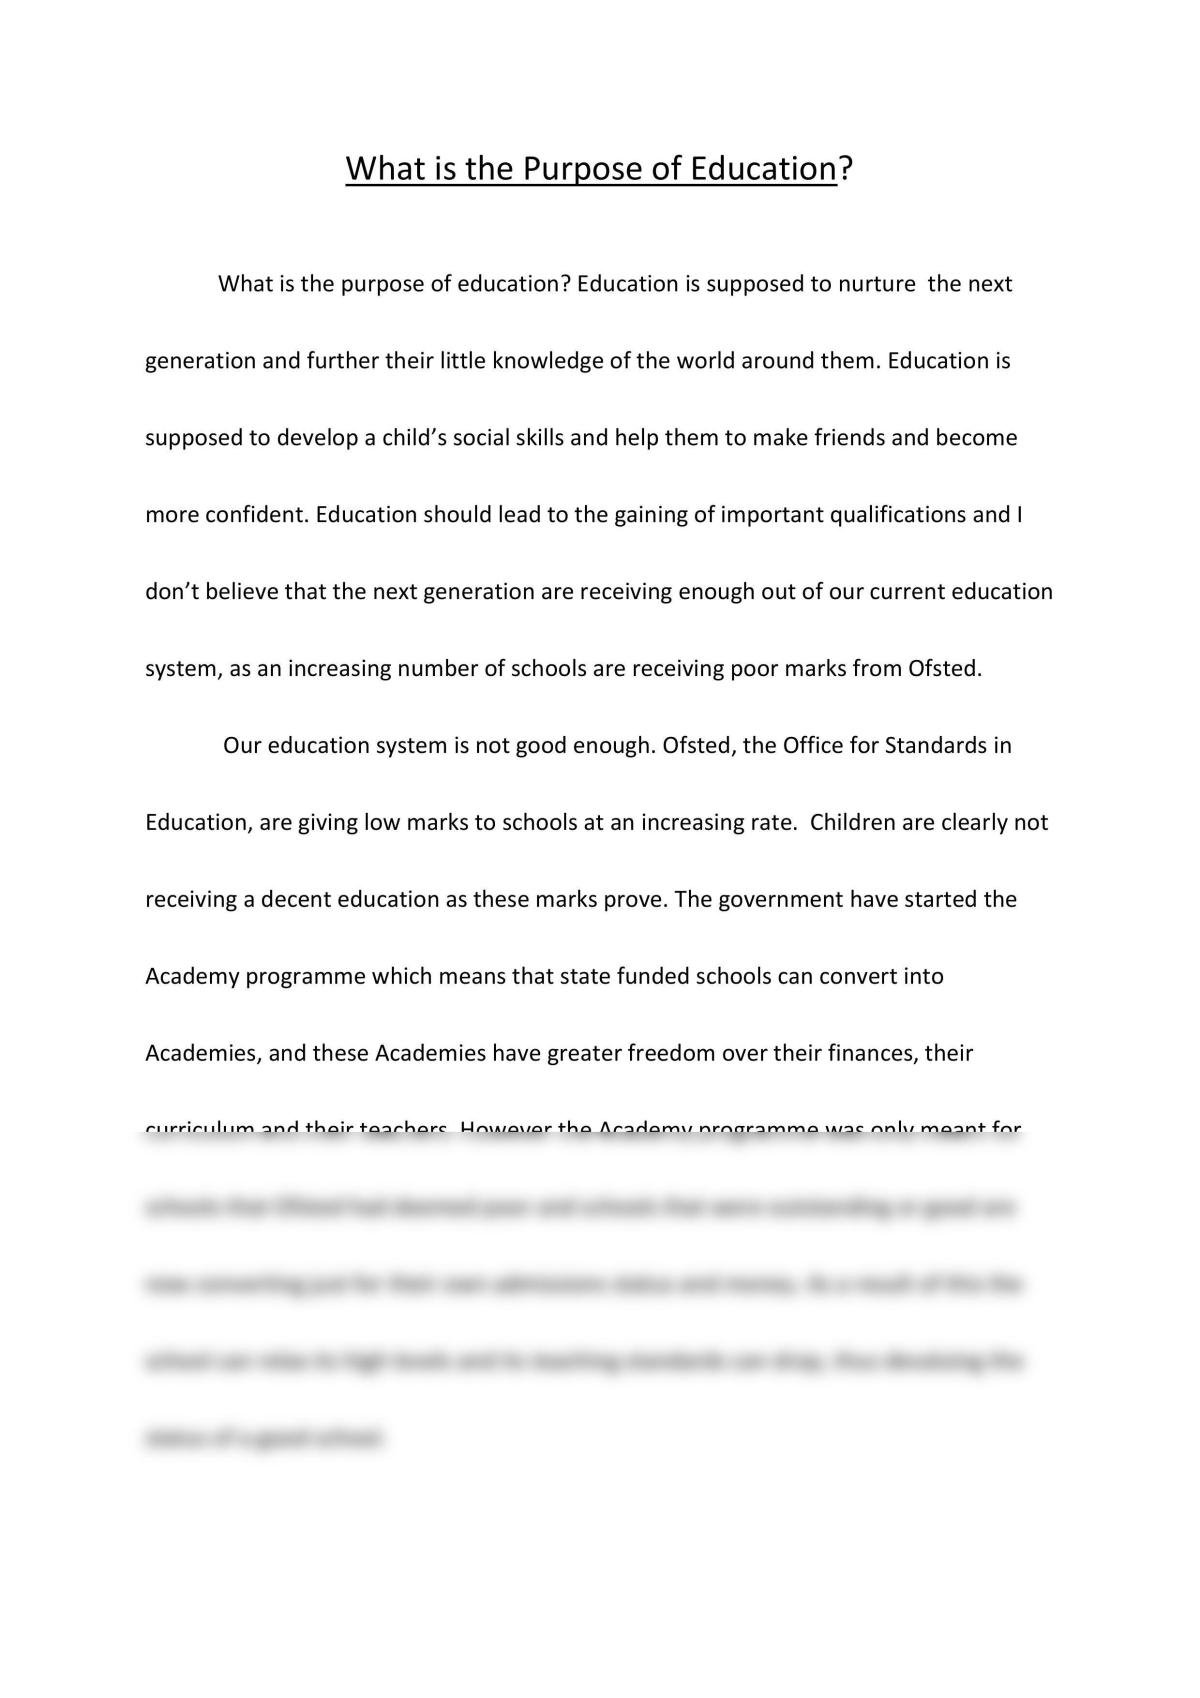 essay on education for class 8